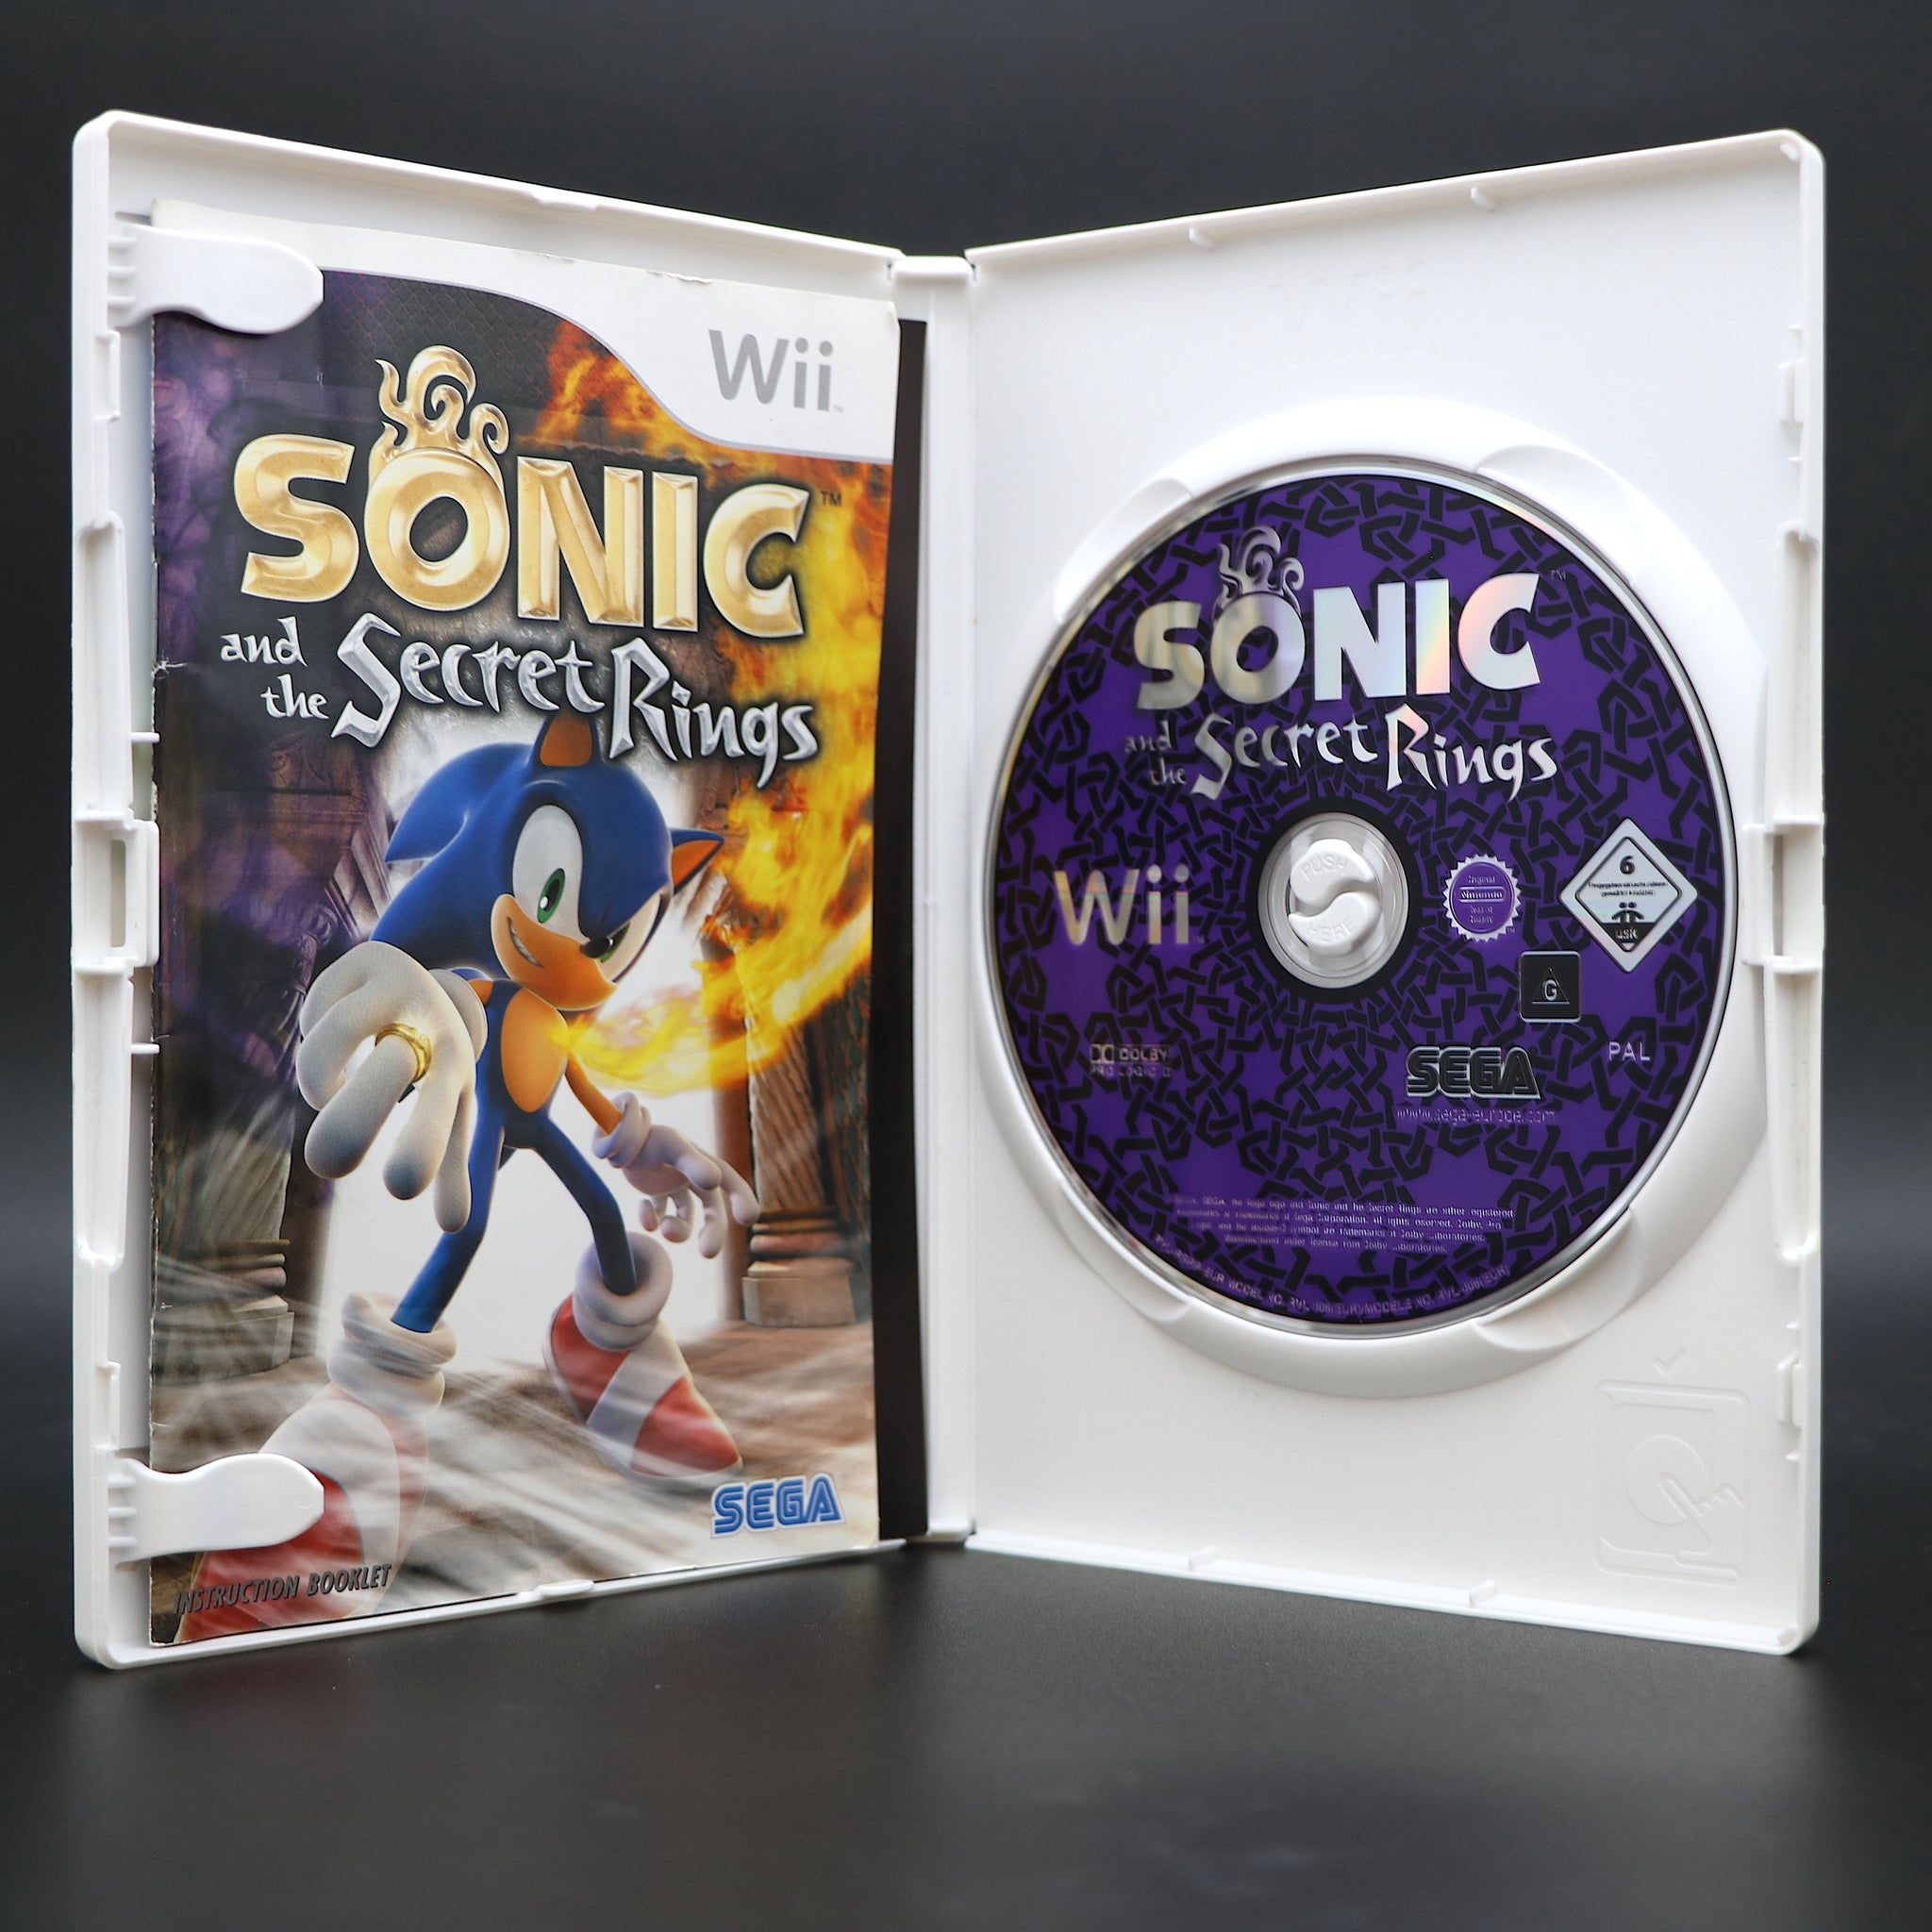 Sonic and the Secret Rings Wii Game | eBay